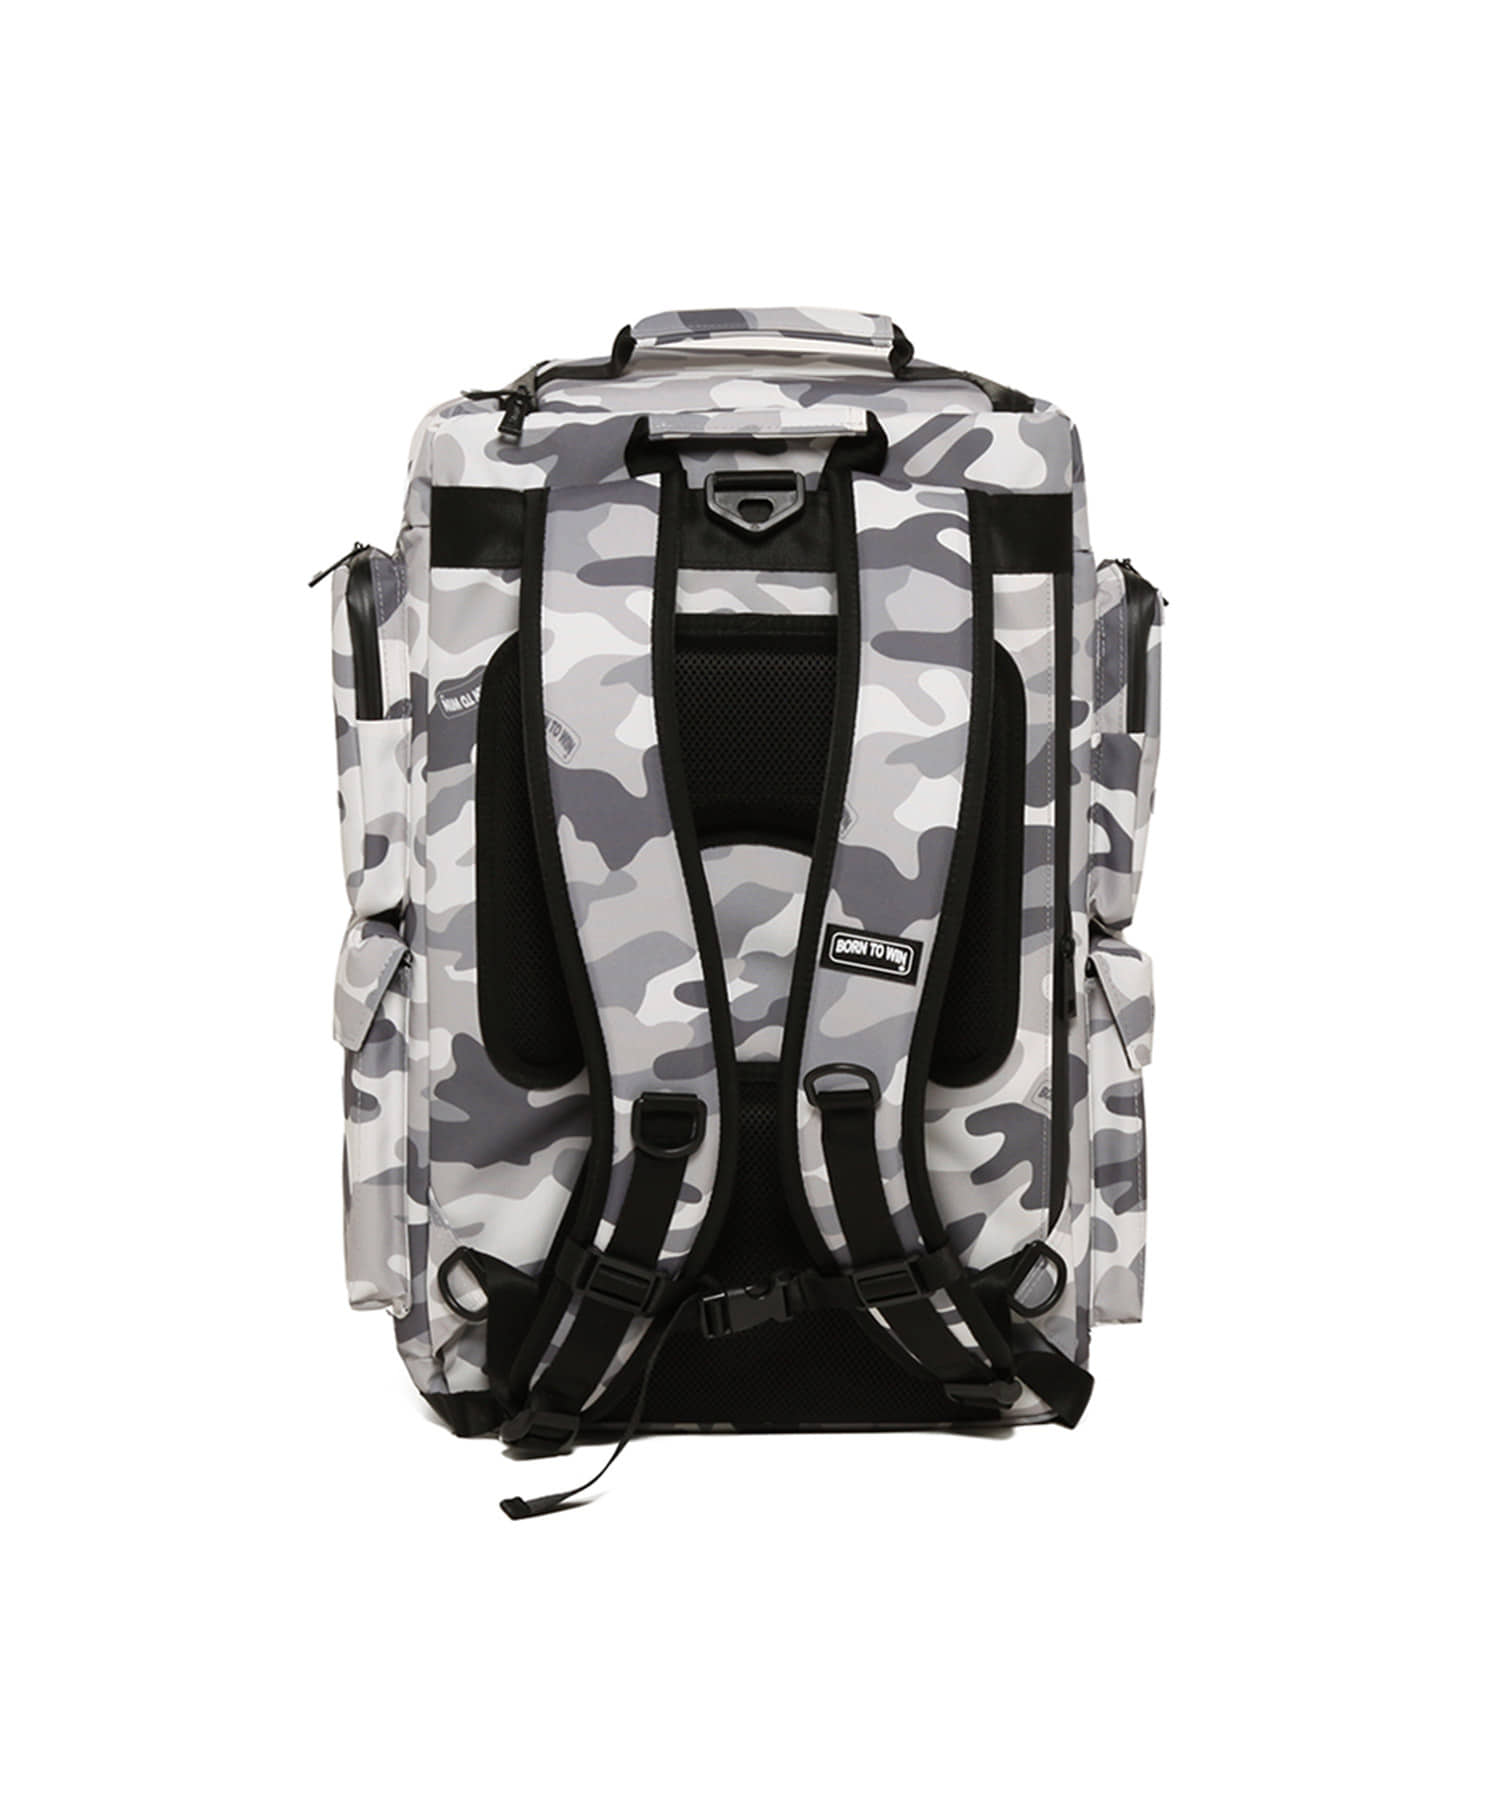 B2 BACKPACK NO PATCH VER [GREY CAMO]